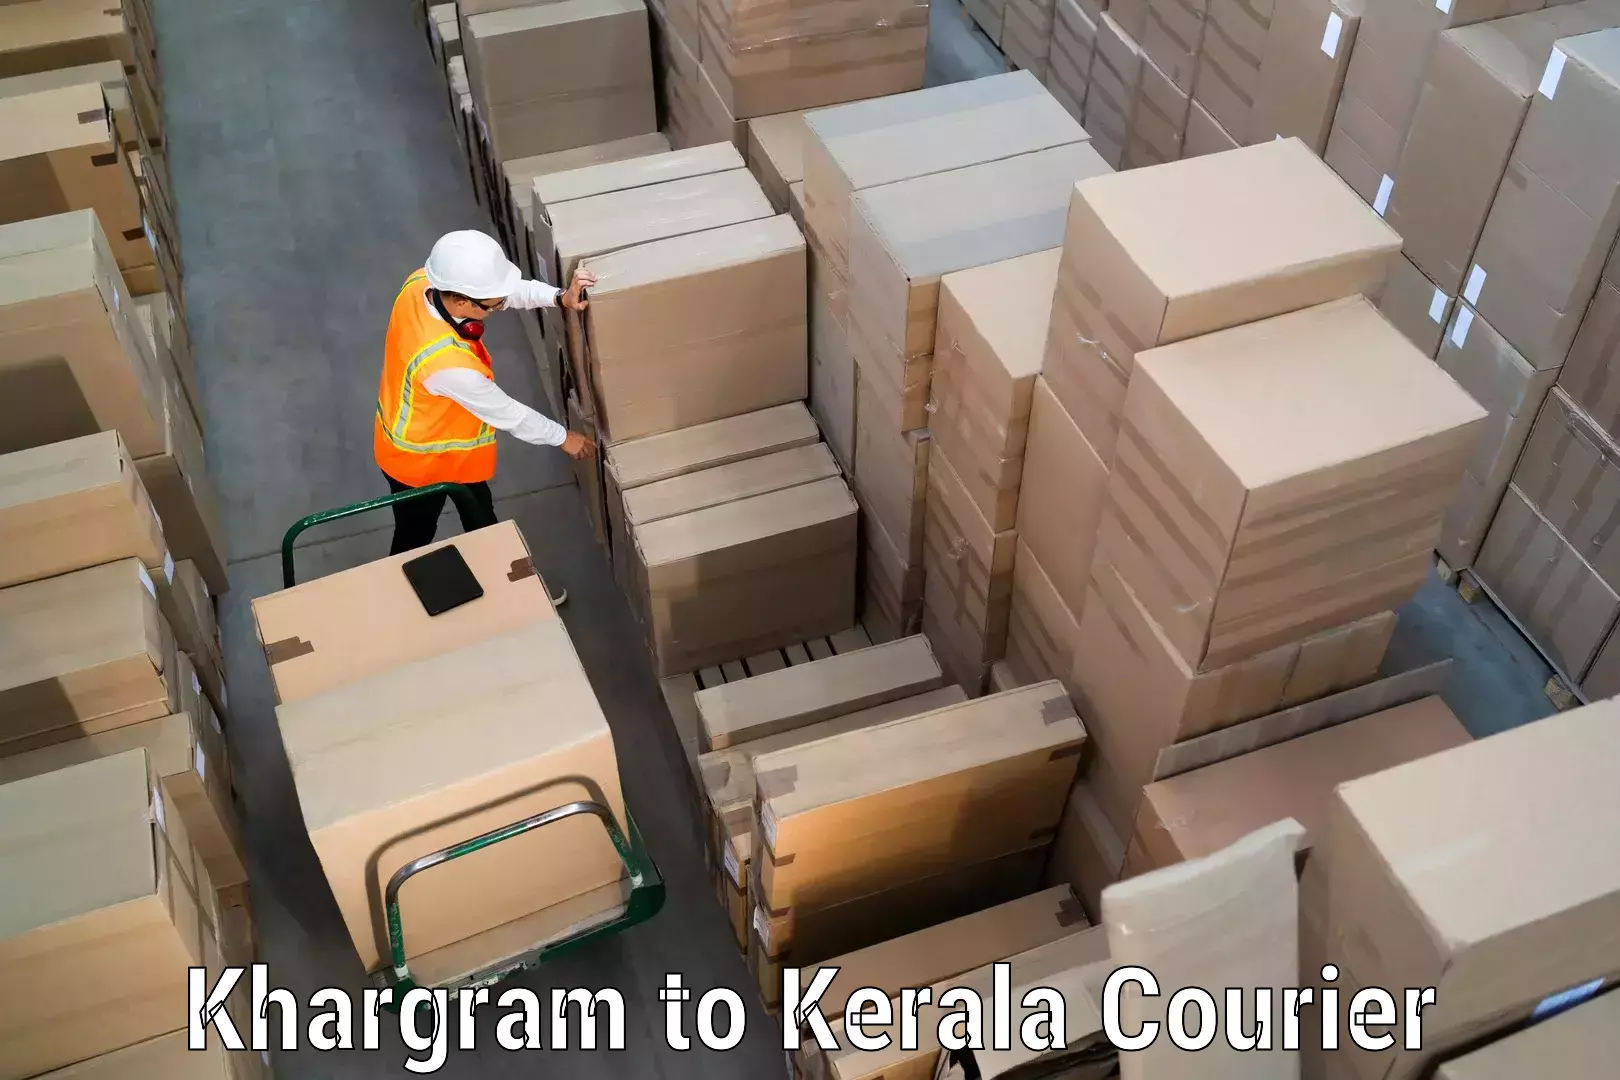 Reliable delivery network Khargram to Guruvayur